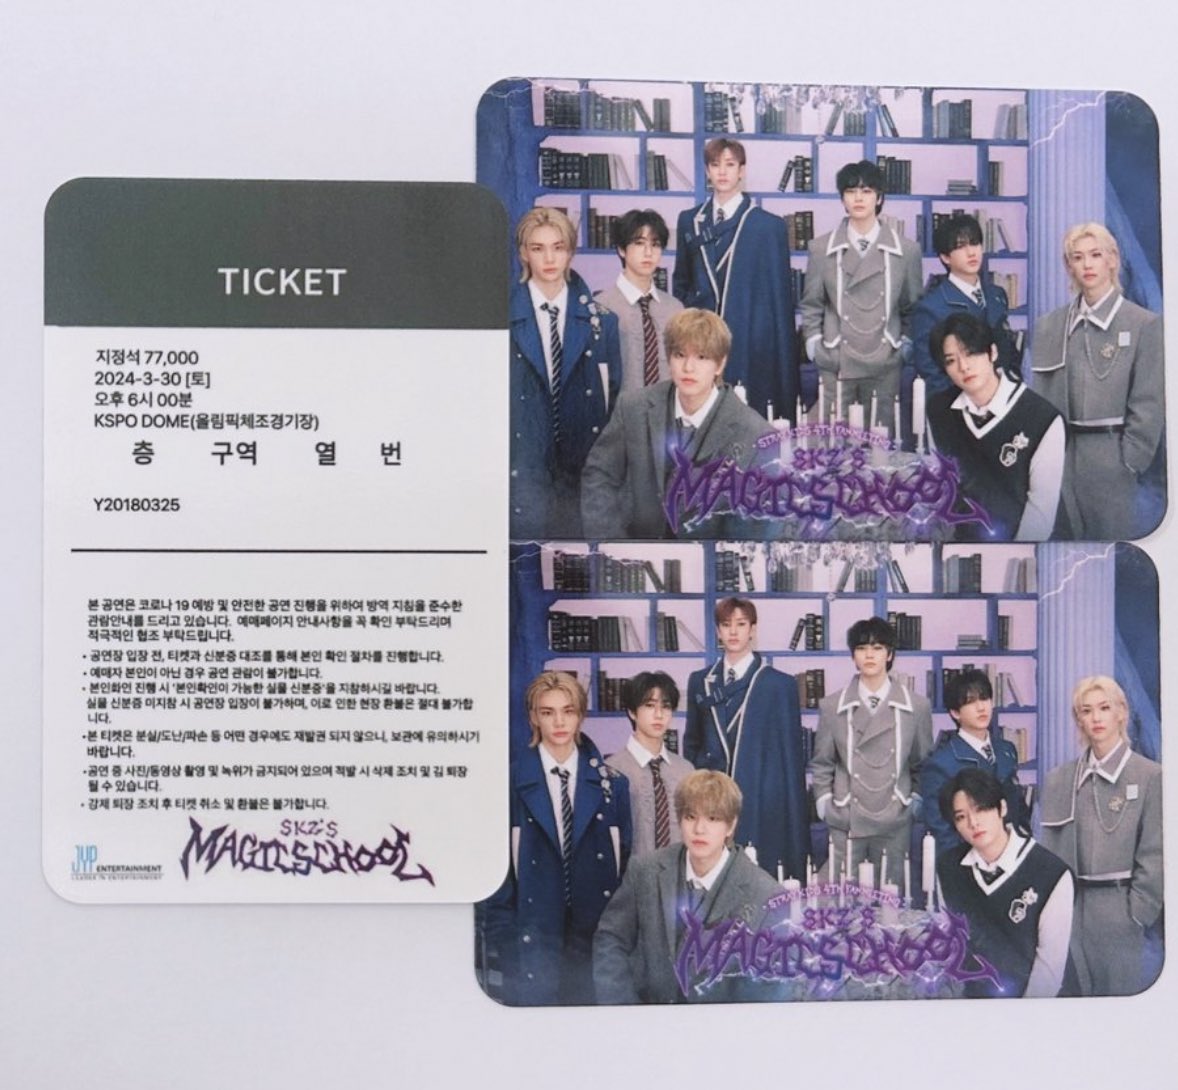 WTA #pasarskz

Is anyone selling these? Really wanna buy one cause the fm didn’t have physical tickets 🥲

(I can’t remember the original twt, I’m sorry I can’t credit the pic 😭)